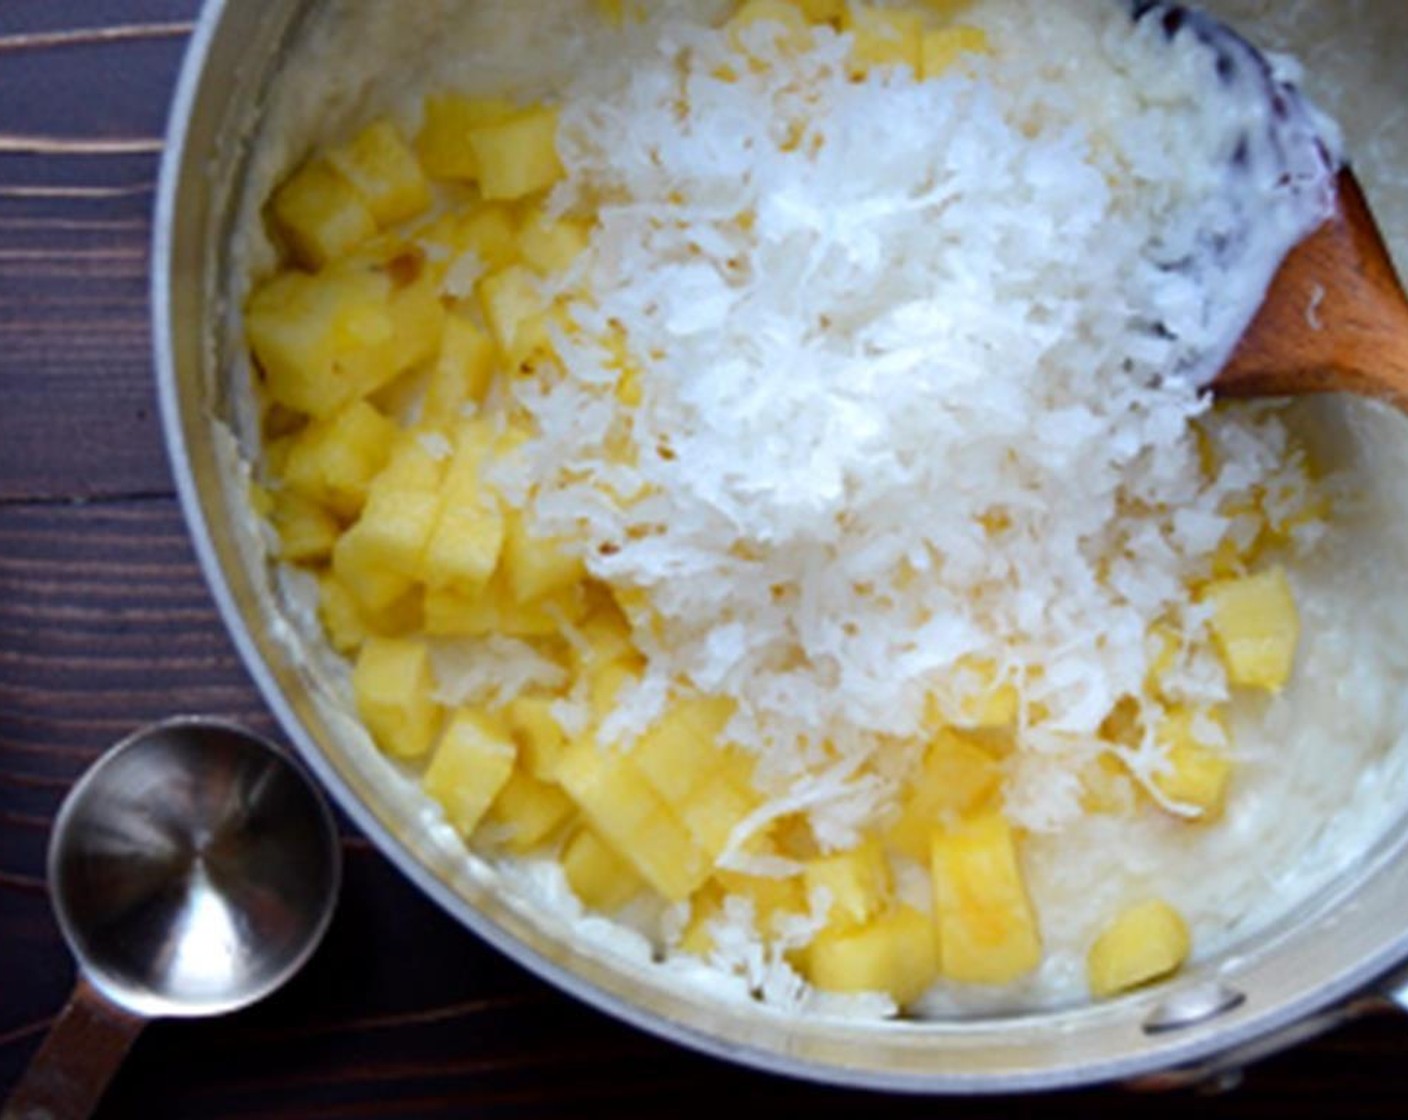 step 3 Stir in the Dark Rum (1 Tbsp), Coconut Extract (1/2 tsp), Sweetened Coconut Flakes (1/2 cup), and Pineapple (1 cup) that has been cut into a 1/4" dices.